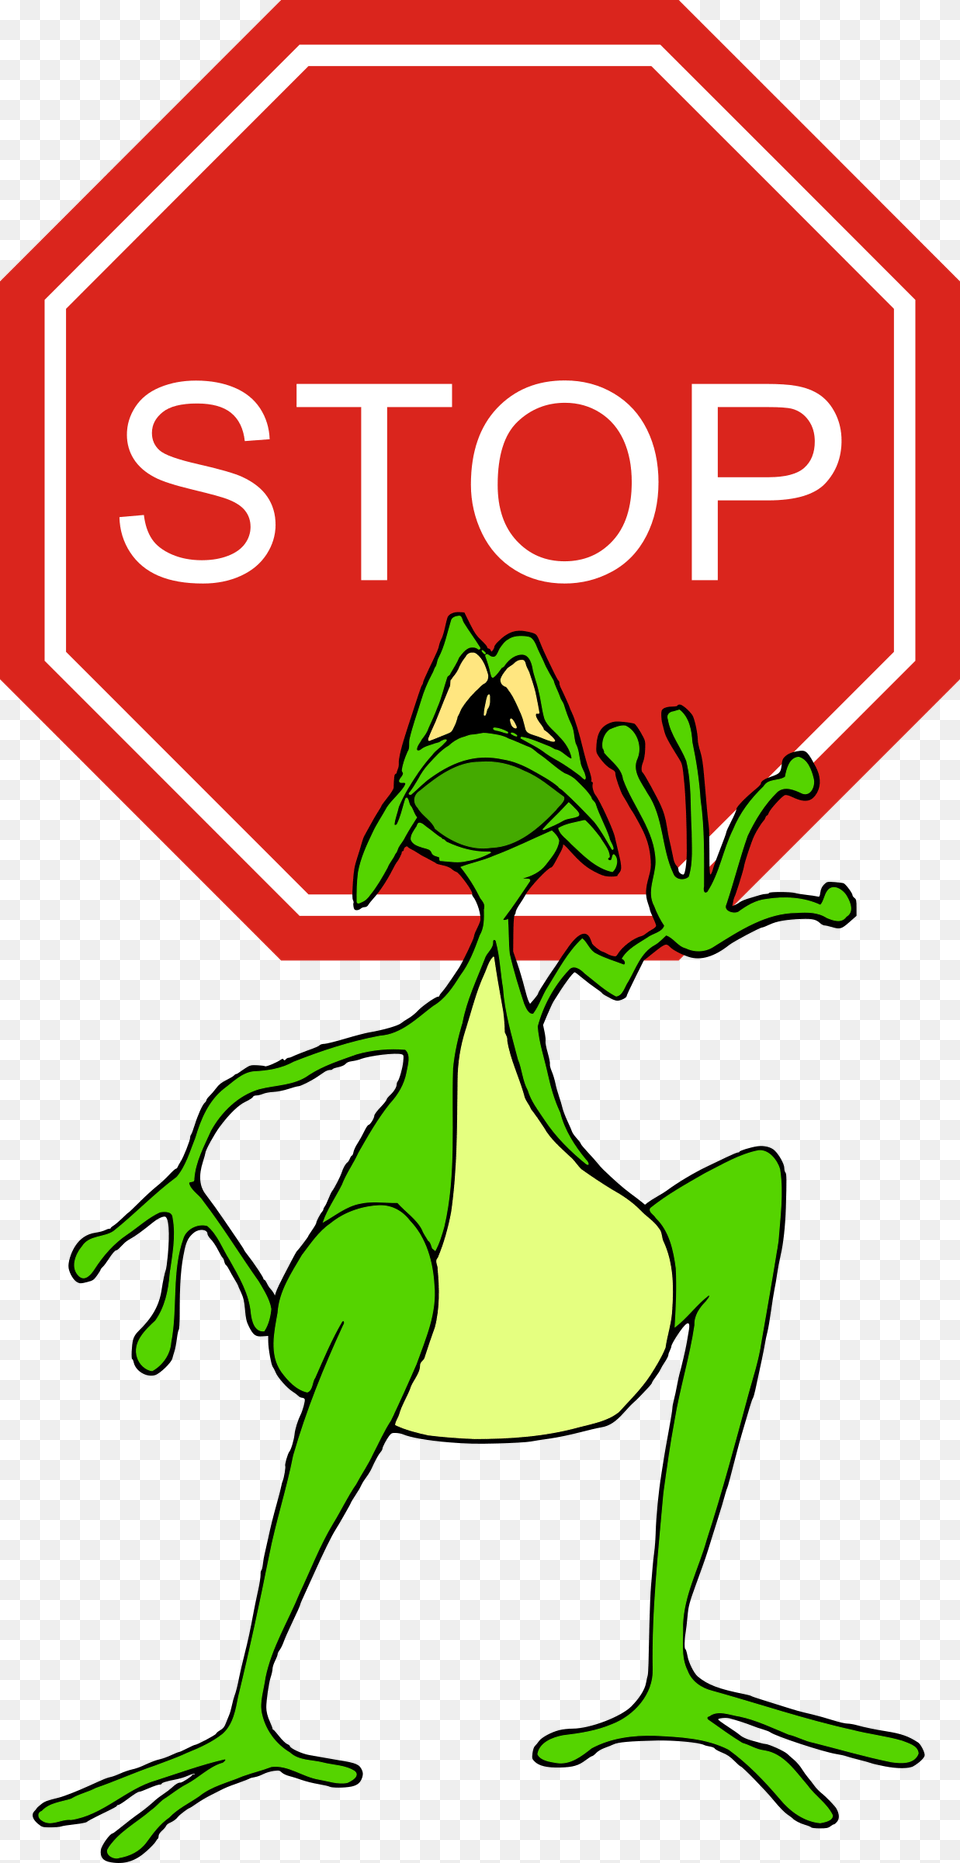 This Free Icons Design Of Stop Sign And Frog, Symbol, Road Sign, Stopsign, Person Png